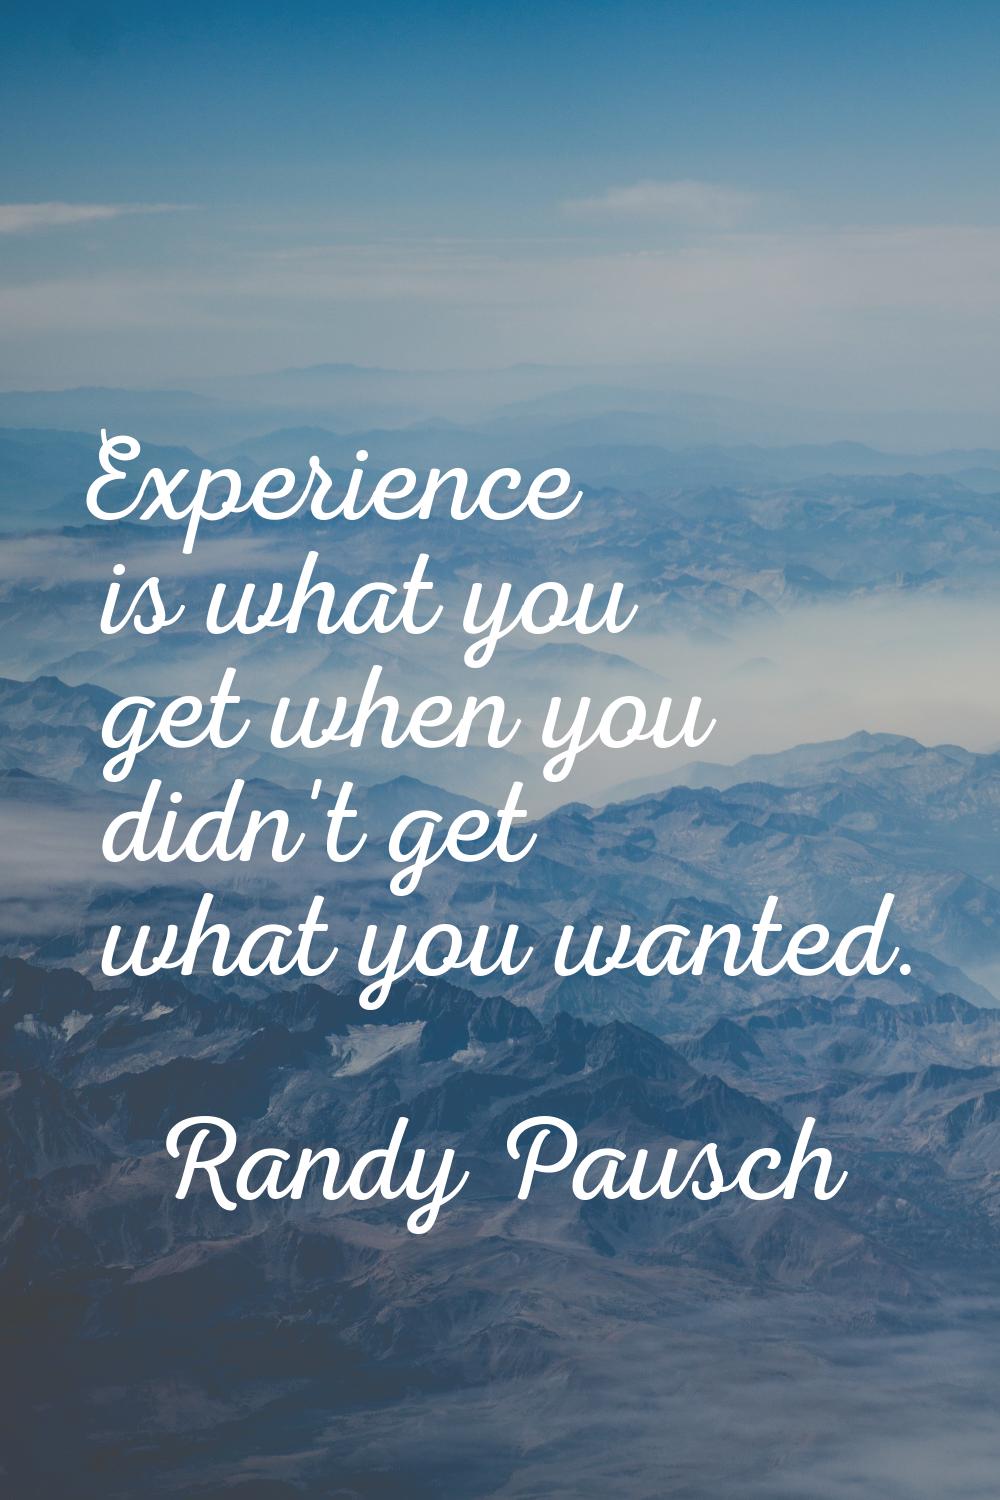 Experience is what you get when you didn't get what you wanted.